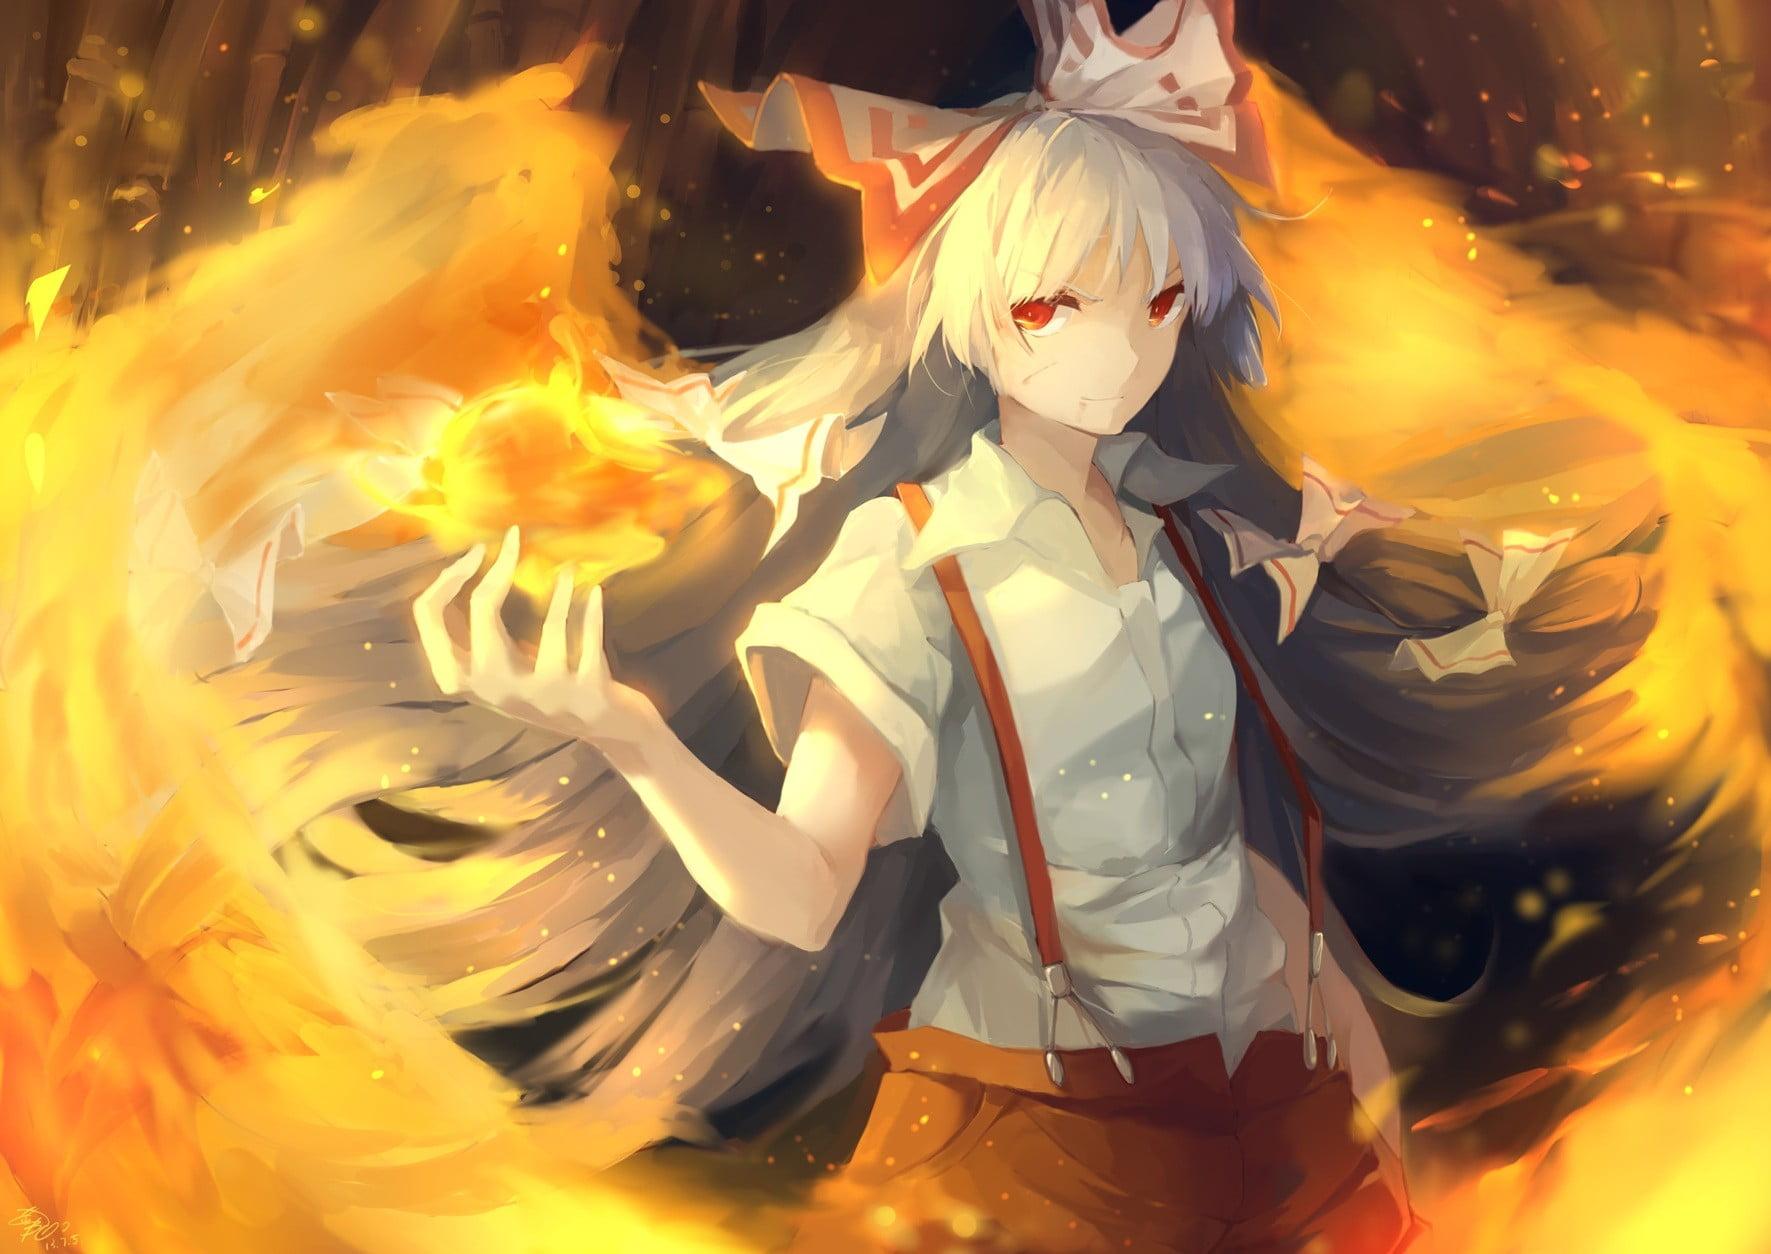 Female anime character with fire magic digital wallpaper, Touhou